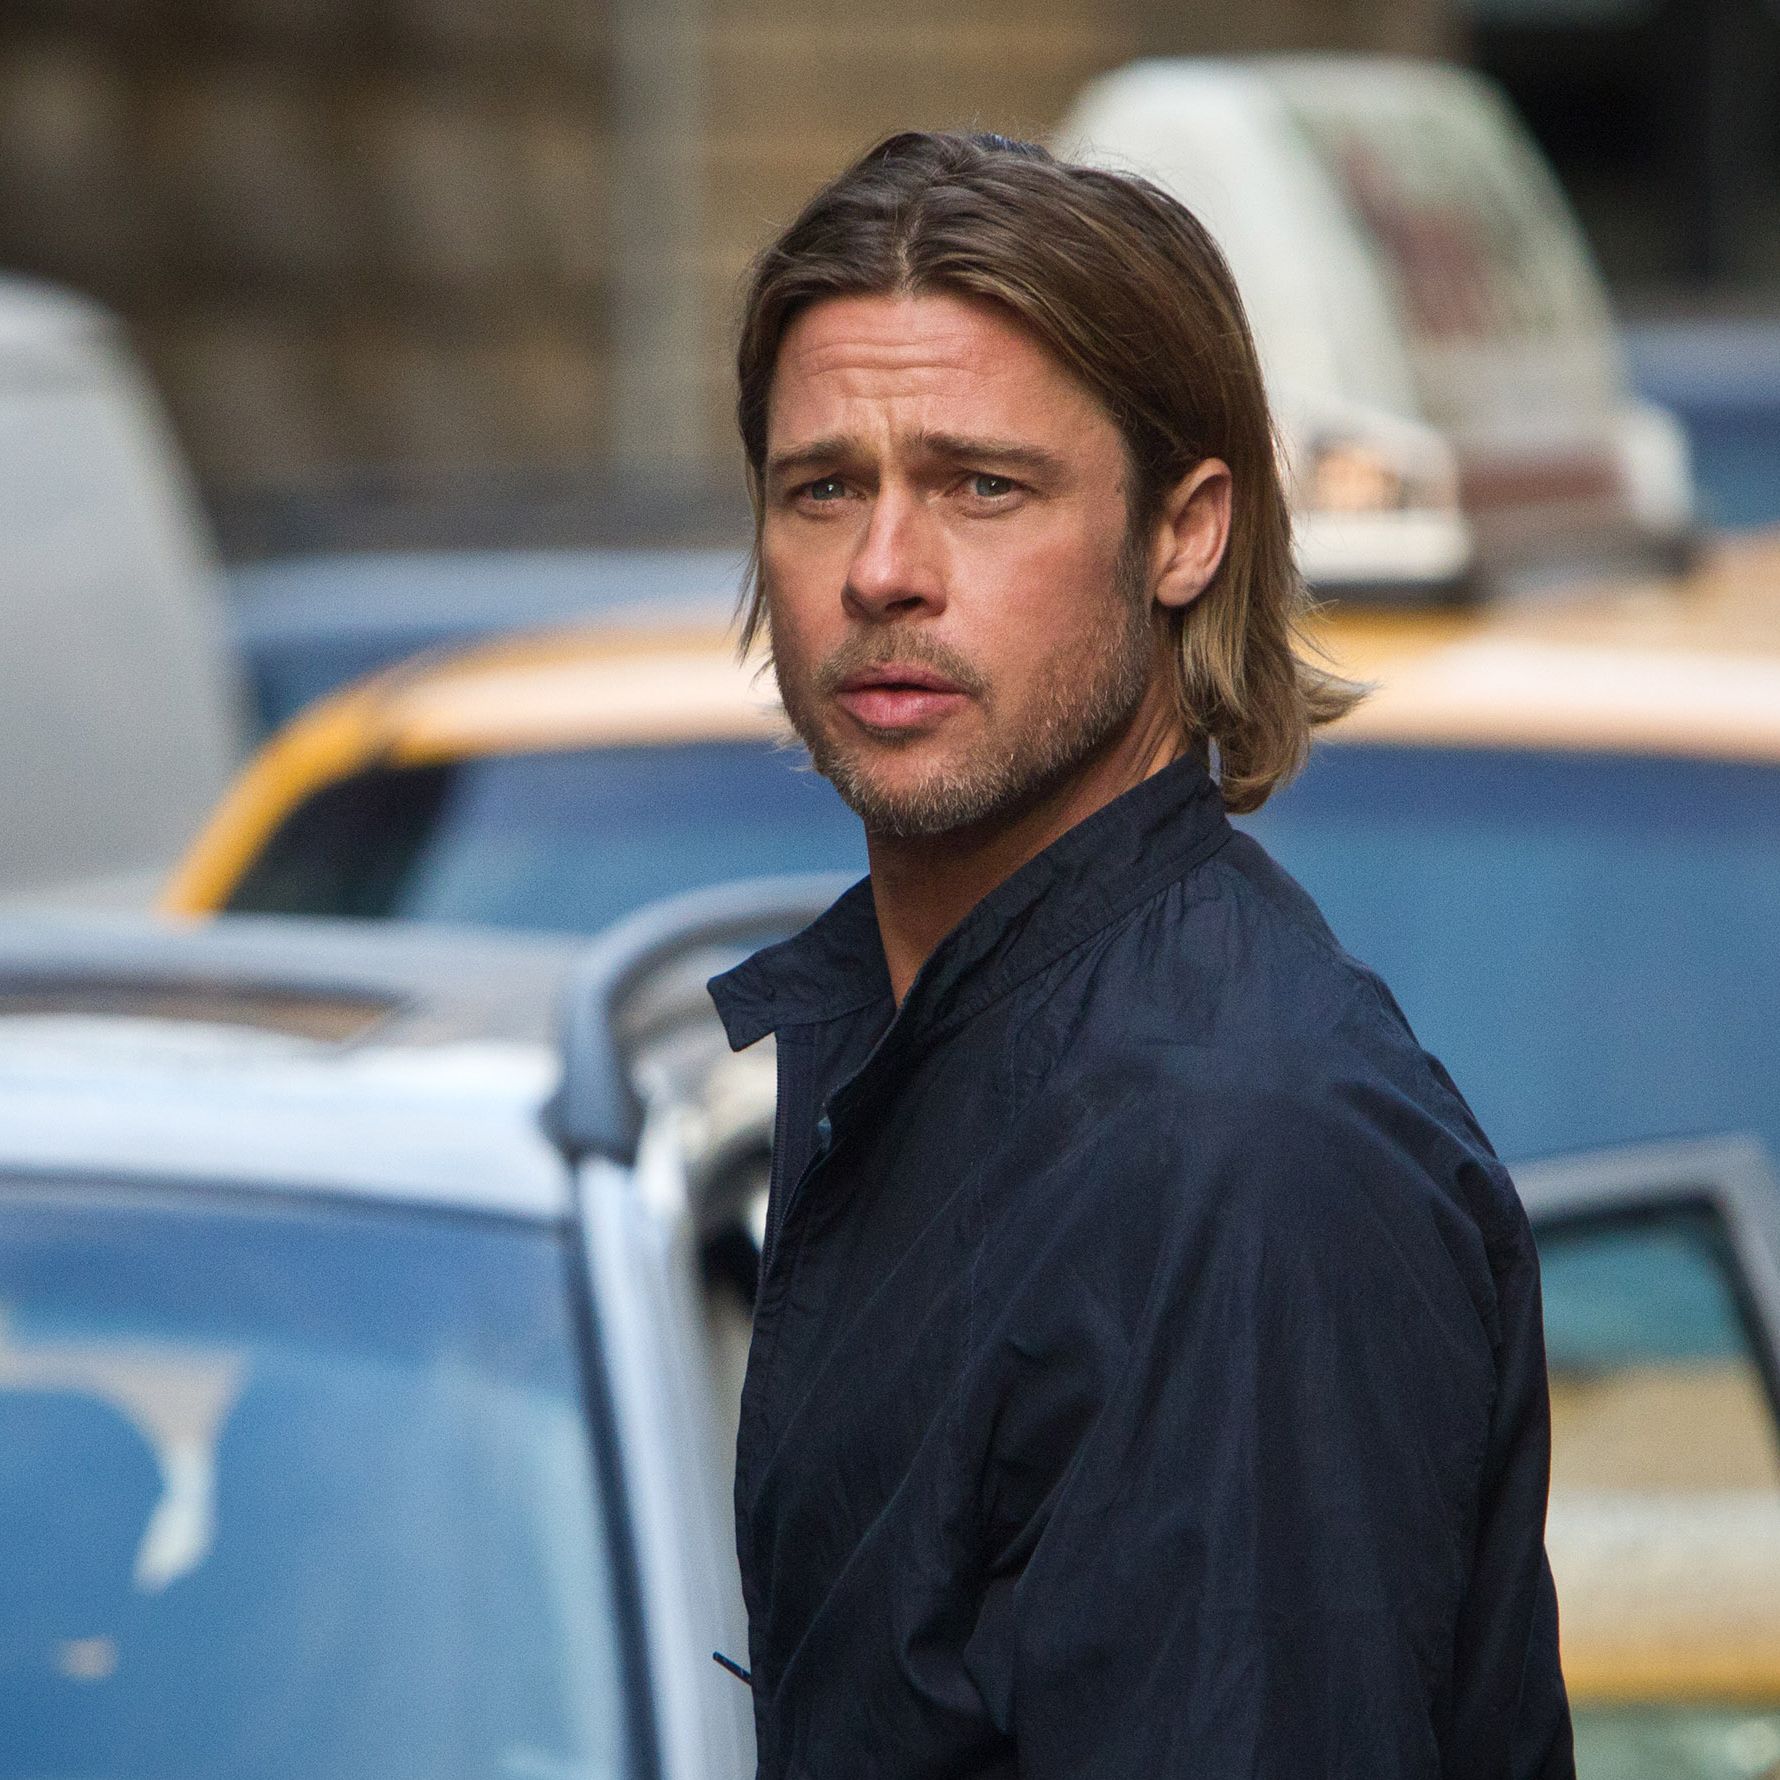 World War Z 2 May Go In A Completely Different Direction